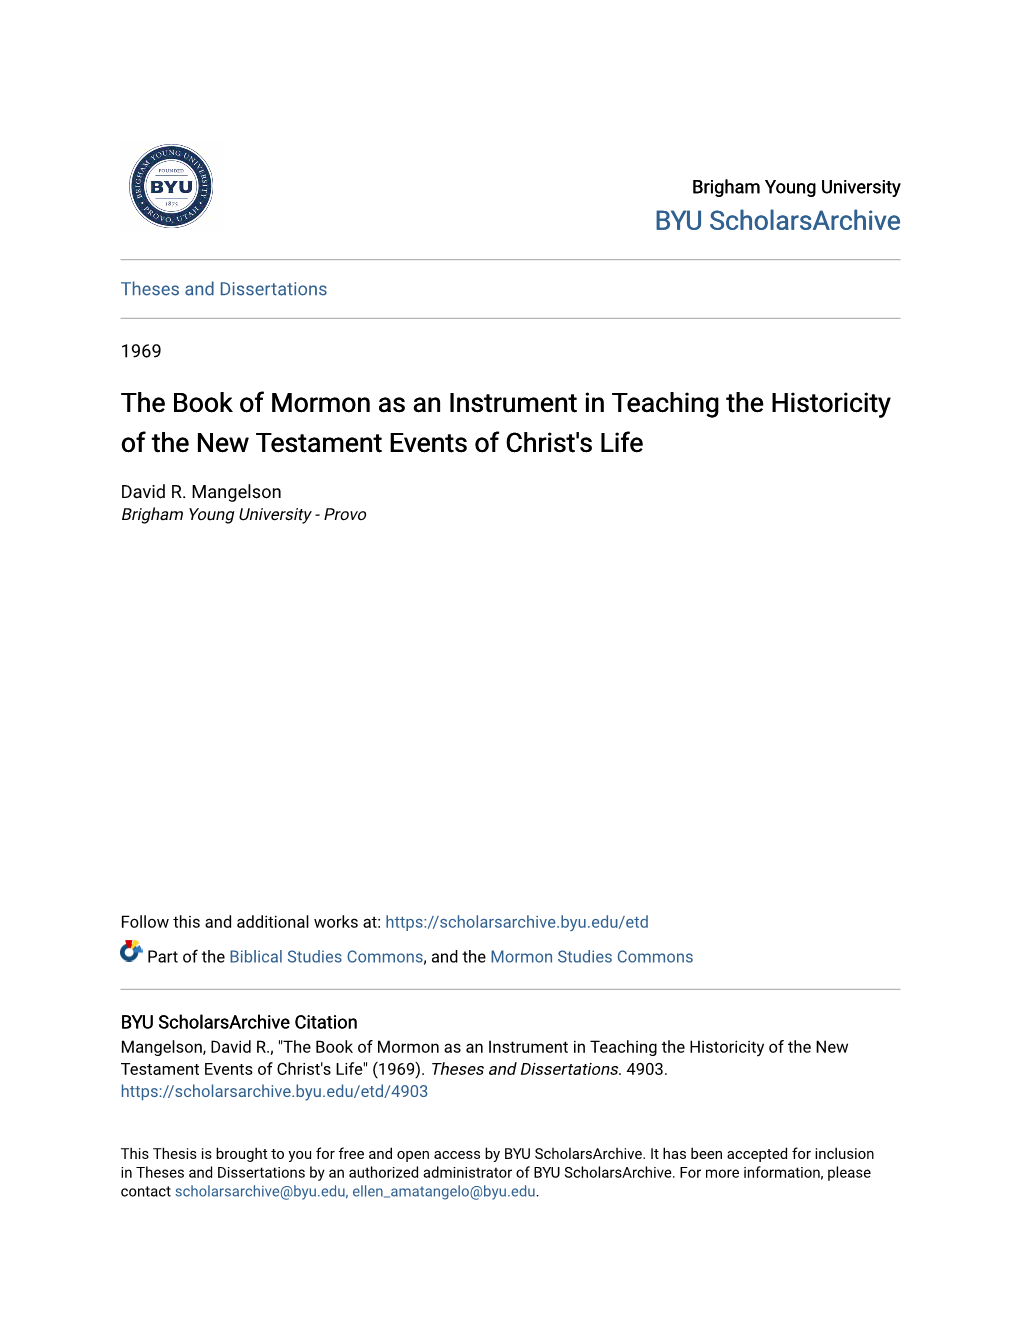 The Book of Mormon As an Instrument in Teaching the Historicity of the New Testament Events of Christ's Life